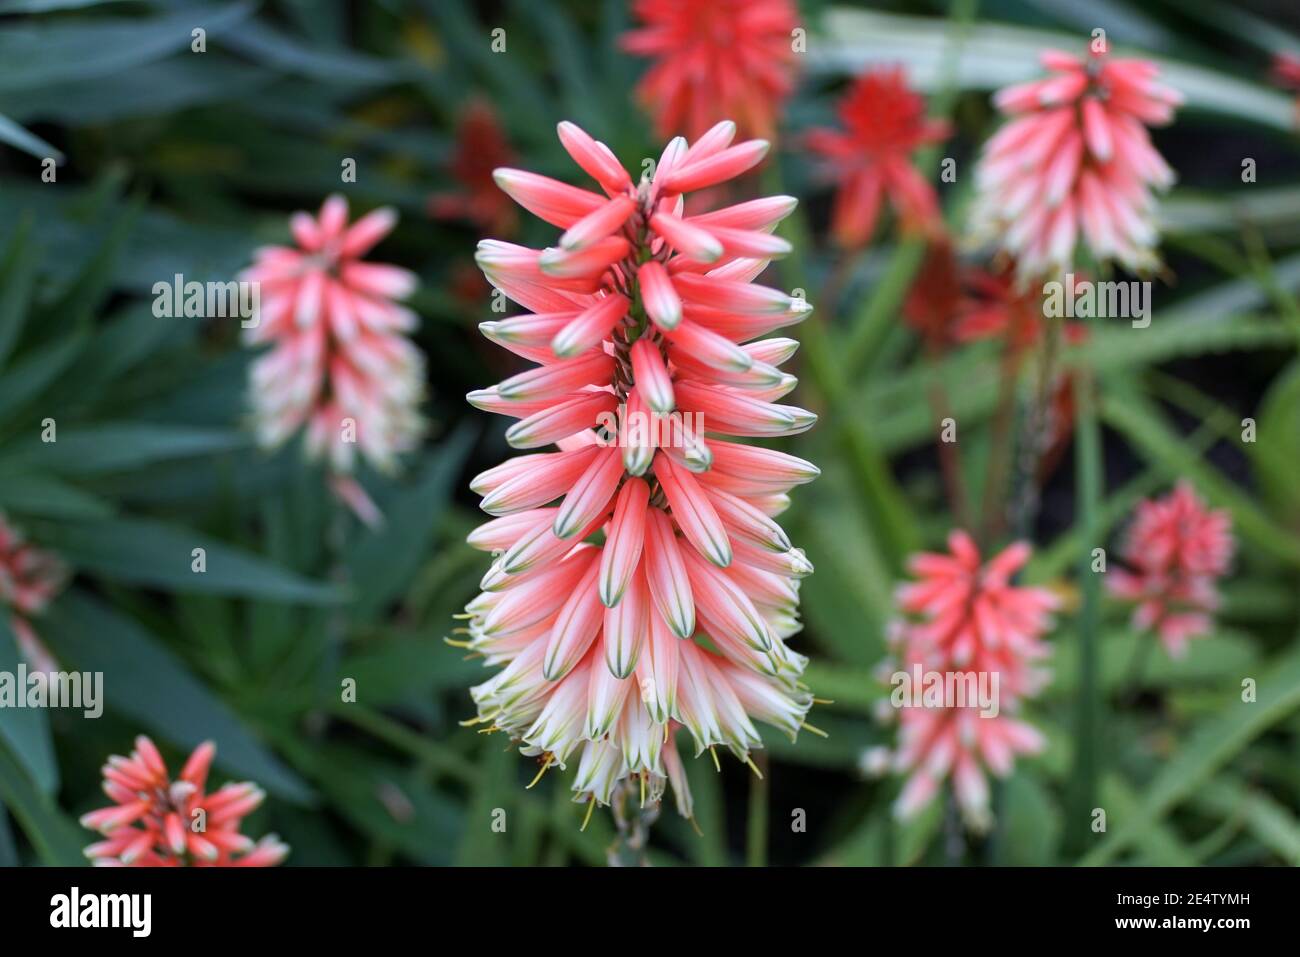 The white and pink color of aloe vera flowers Stock Photo - Alamy